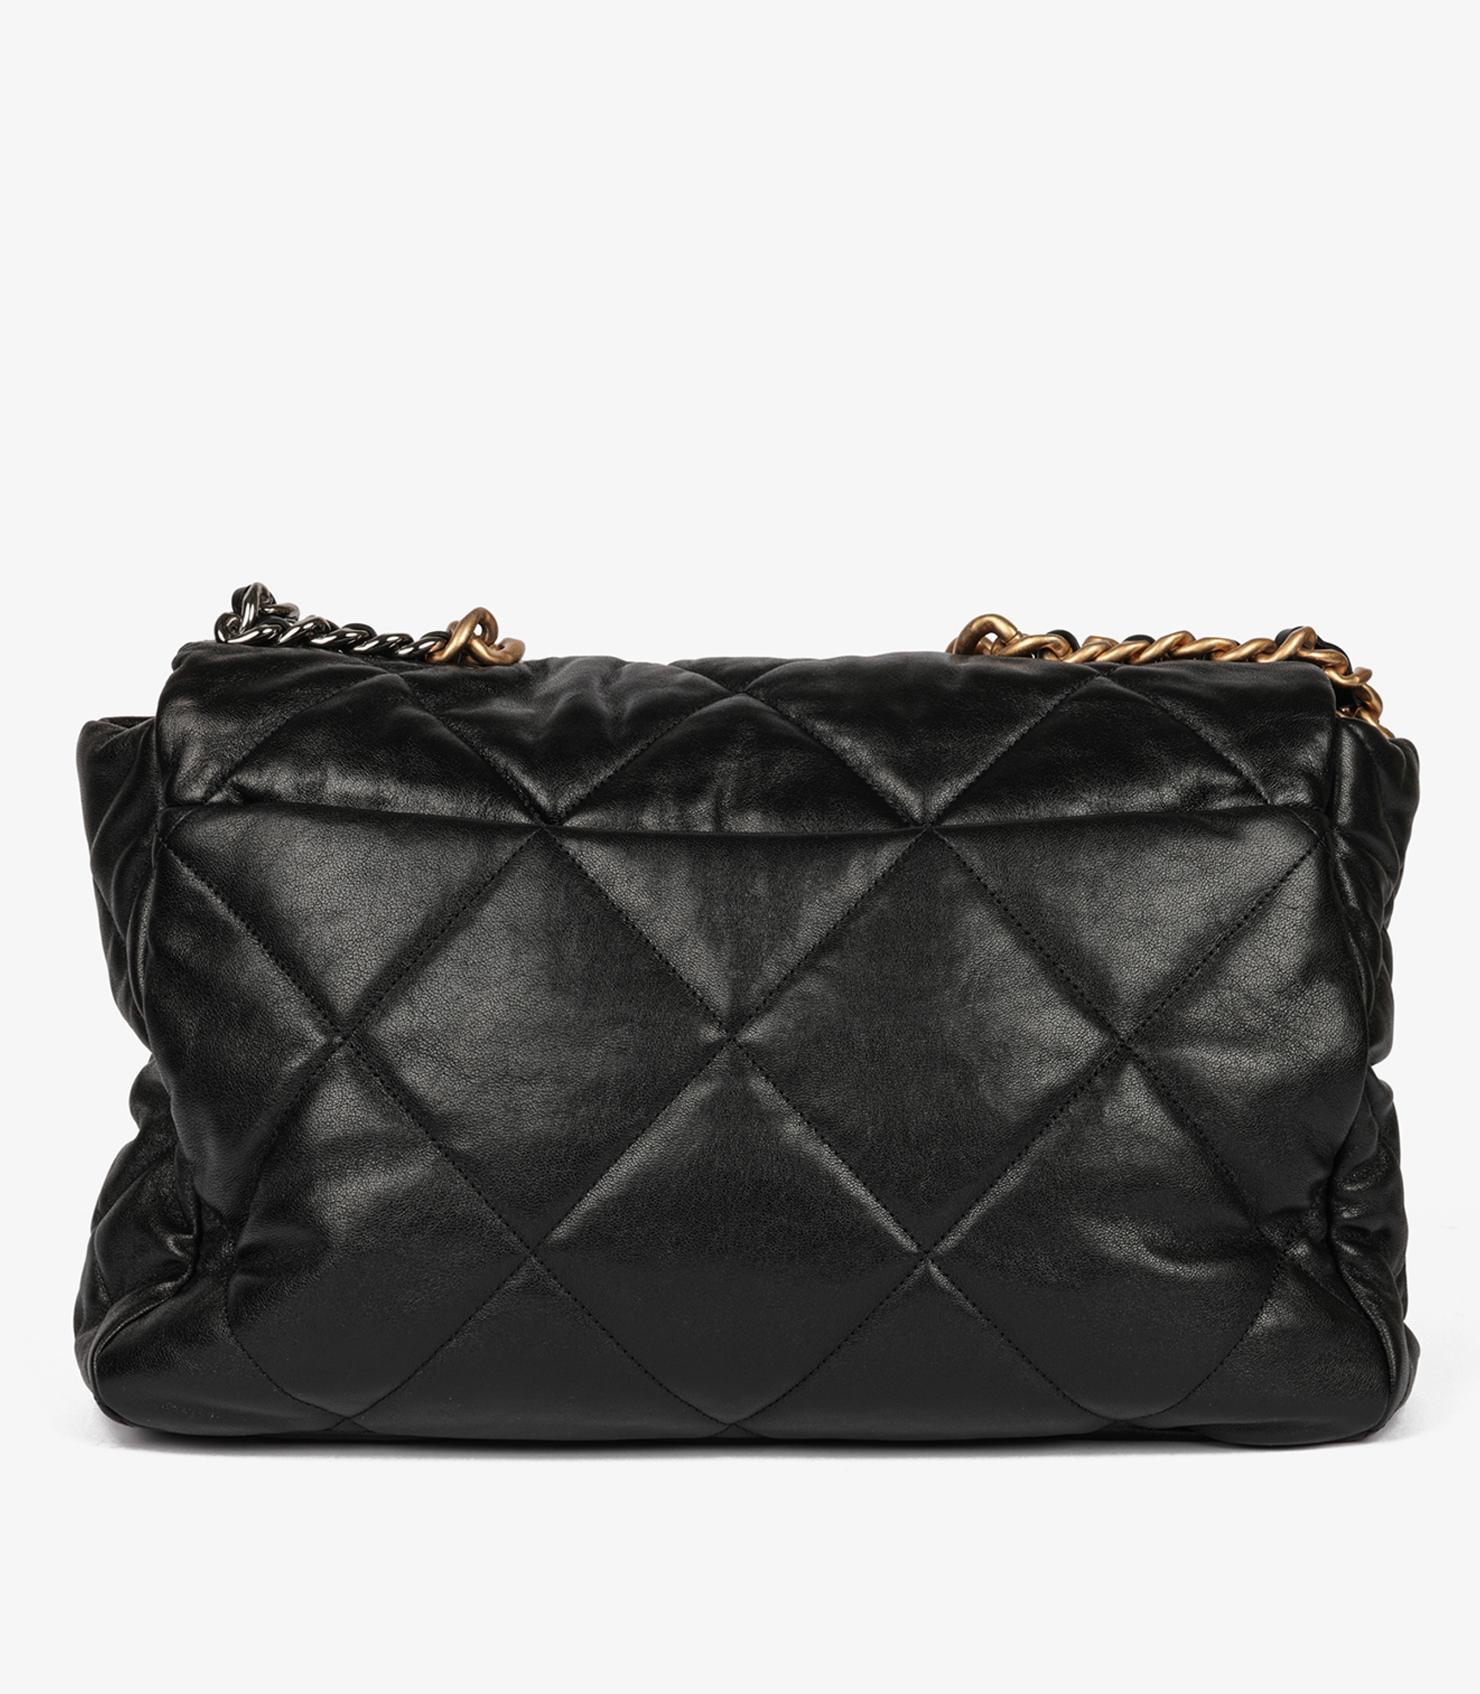 Chanel Black Quilted Lambskin Maxi 19 Flap Bag 6